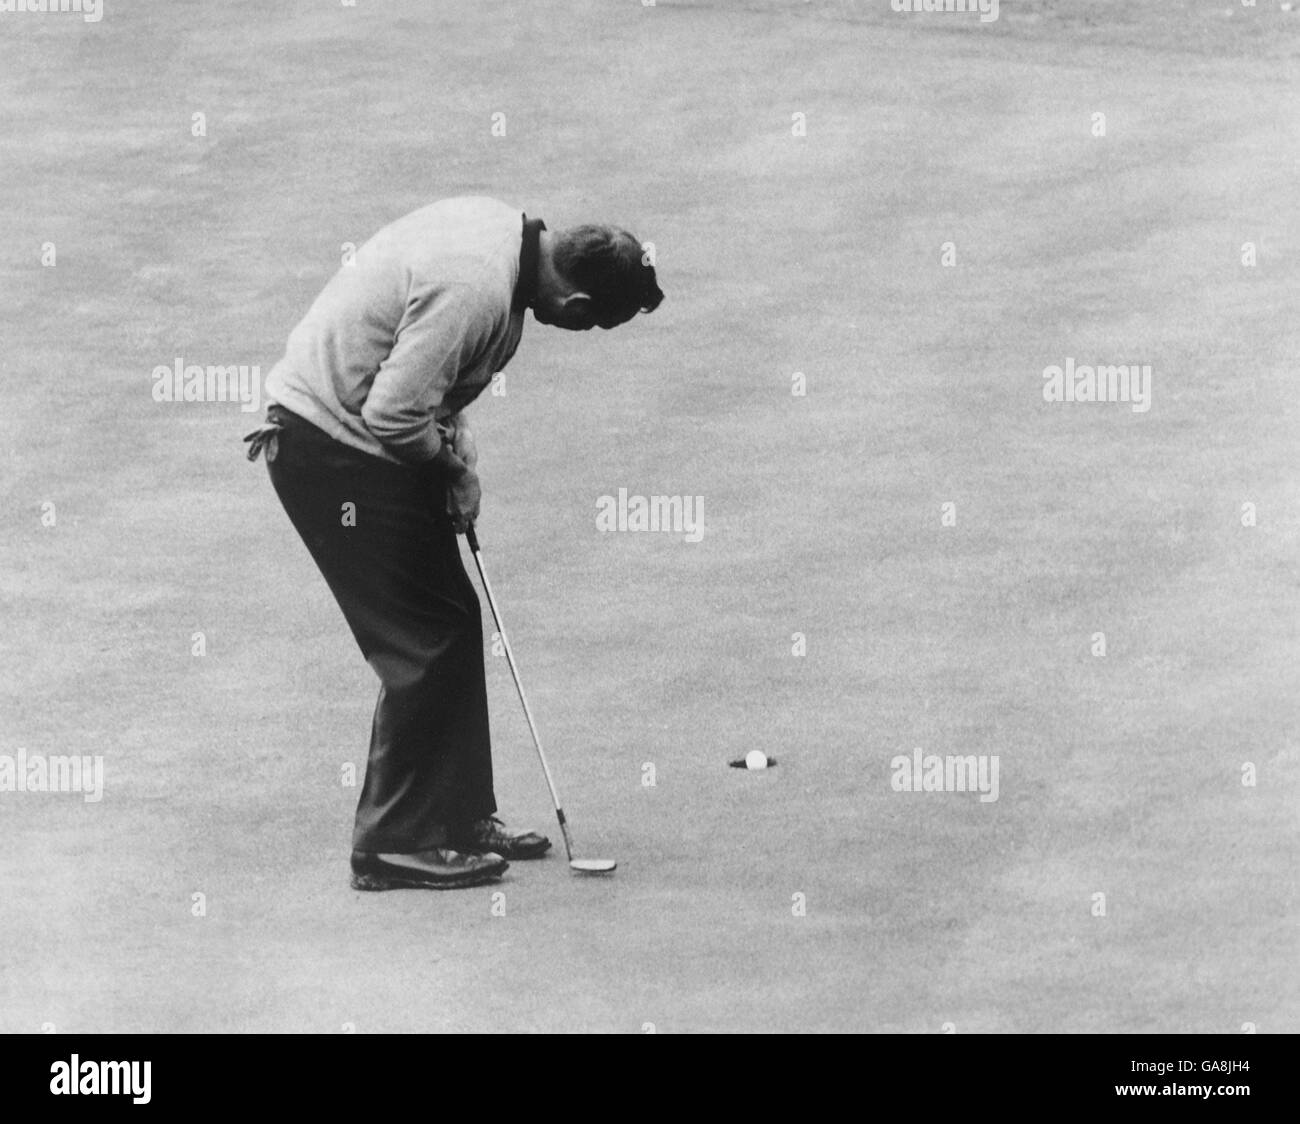 Golf - Piccadilly World Matchplay Championship - Wentworth. Arnold Palmer mettant sur le 16e vert Banque D'Images